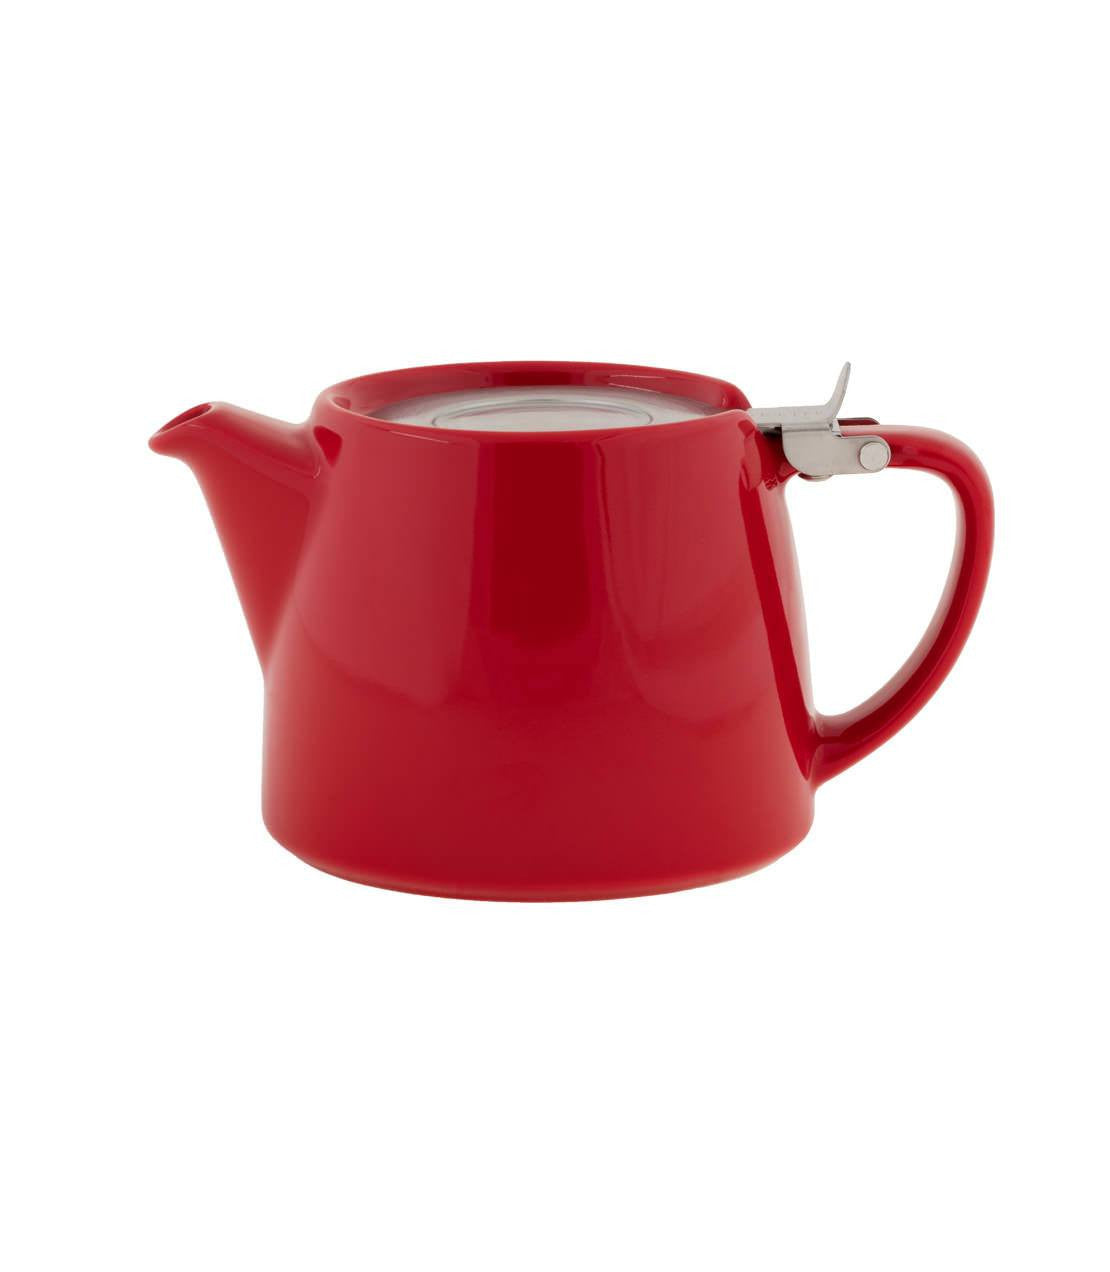 Stump Teapot with Infuser 18 oz (18 oz. / White) - 18 oz. White of , by Harney & Sons Fine Teas